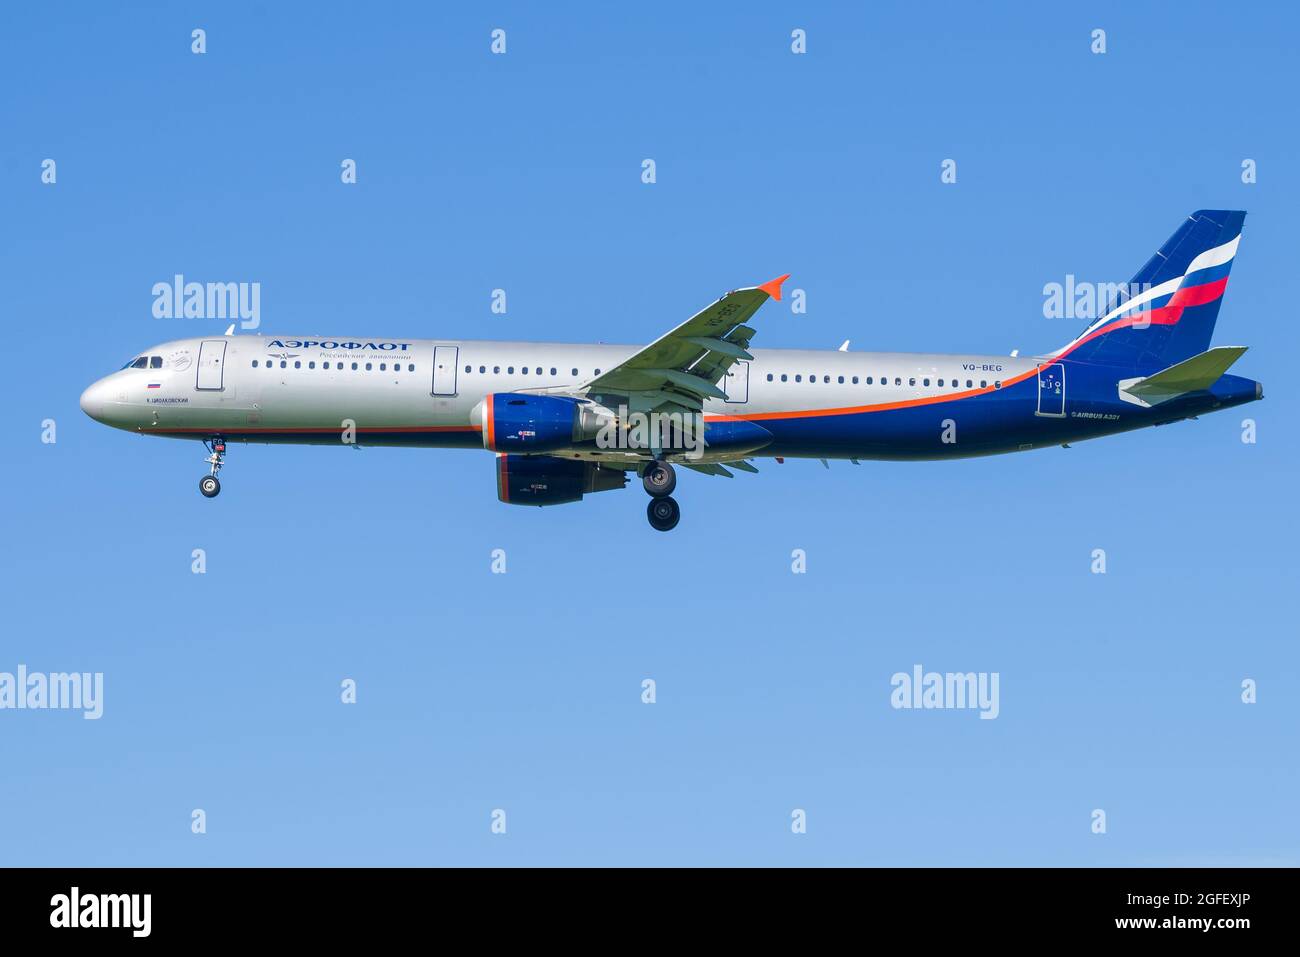 SAINT PETERSBURG, RUSSIA - AUGUST 08, 2020: Airbus A321 'K. Tsiolkovsky' (VQ-BEG) Aeroflot - Russian Airlines on a glide path in a cloudless blue sky. Stock Photo